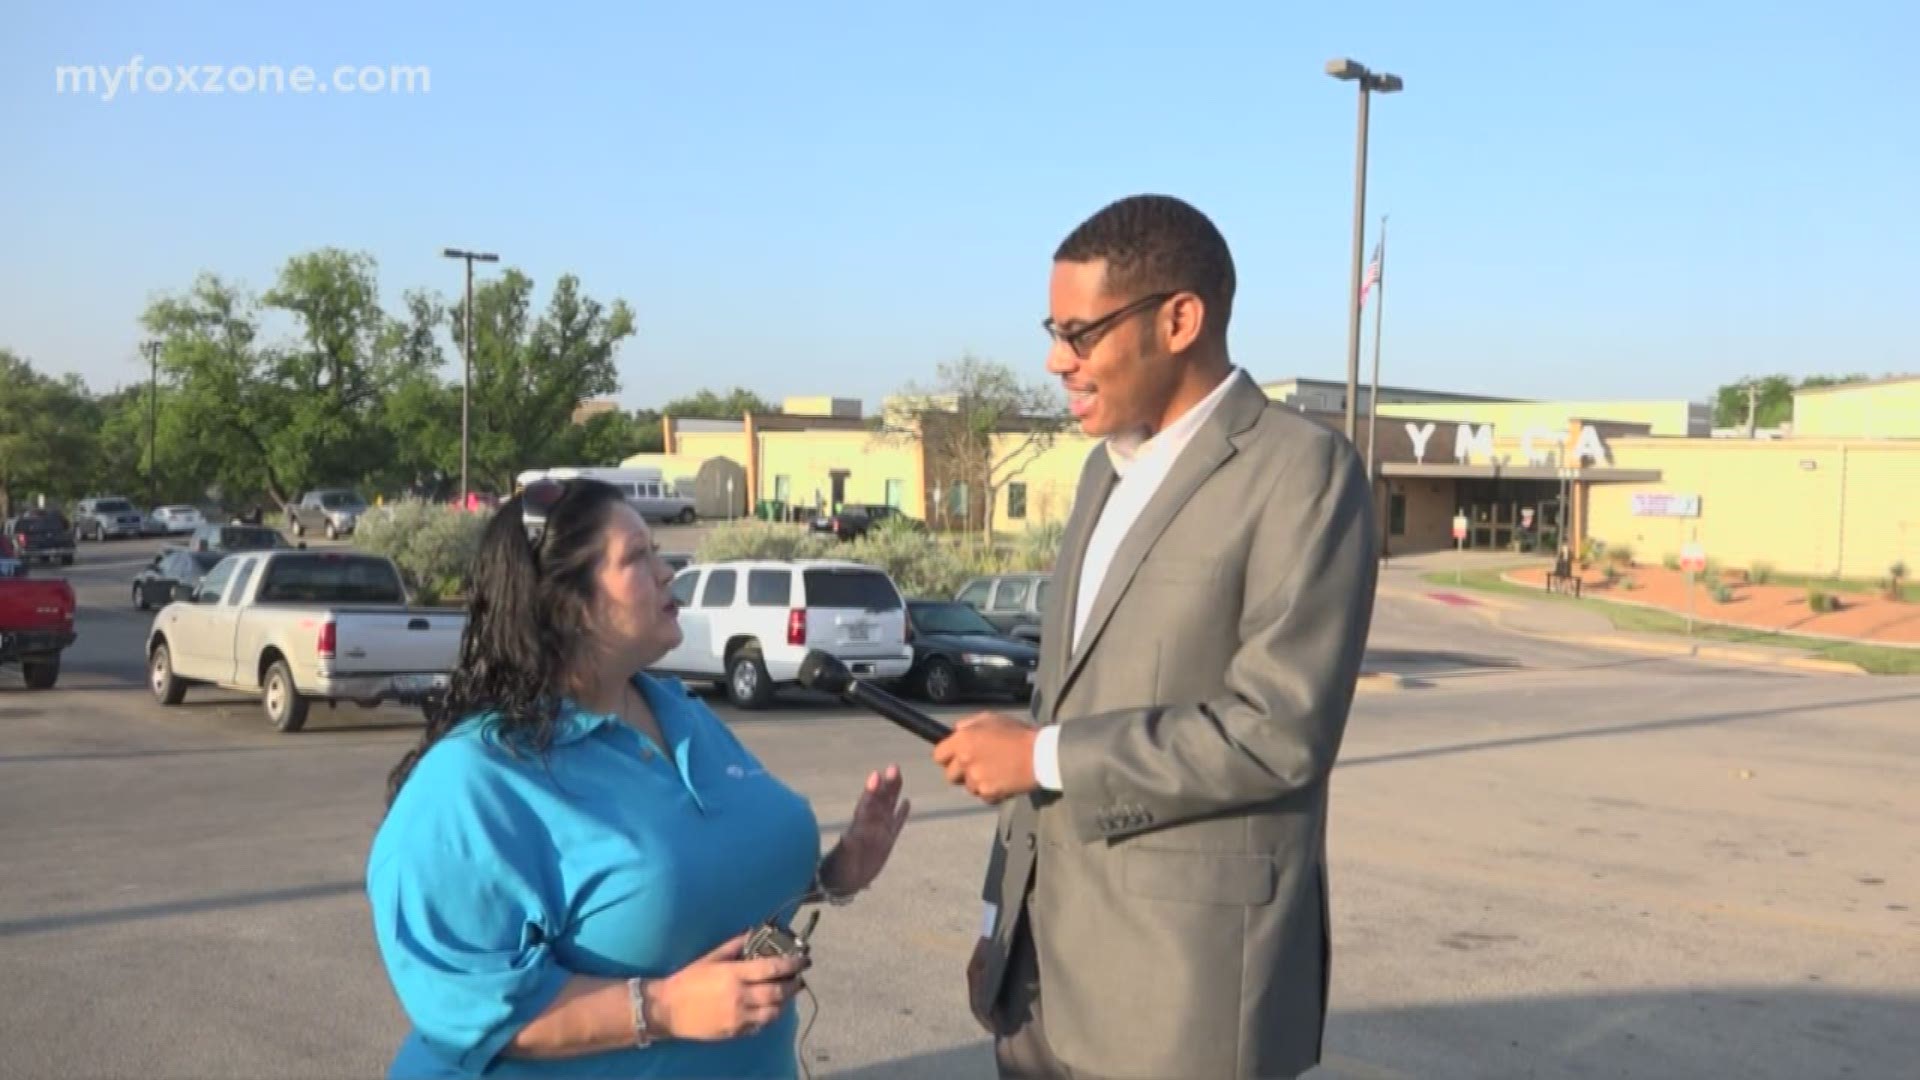 Our Malik Mingo speaks with La Esperanza Clinic about their upcoming health fair at the YMCA.